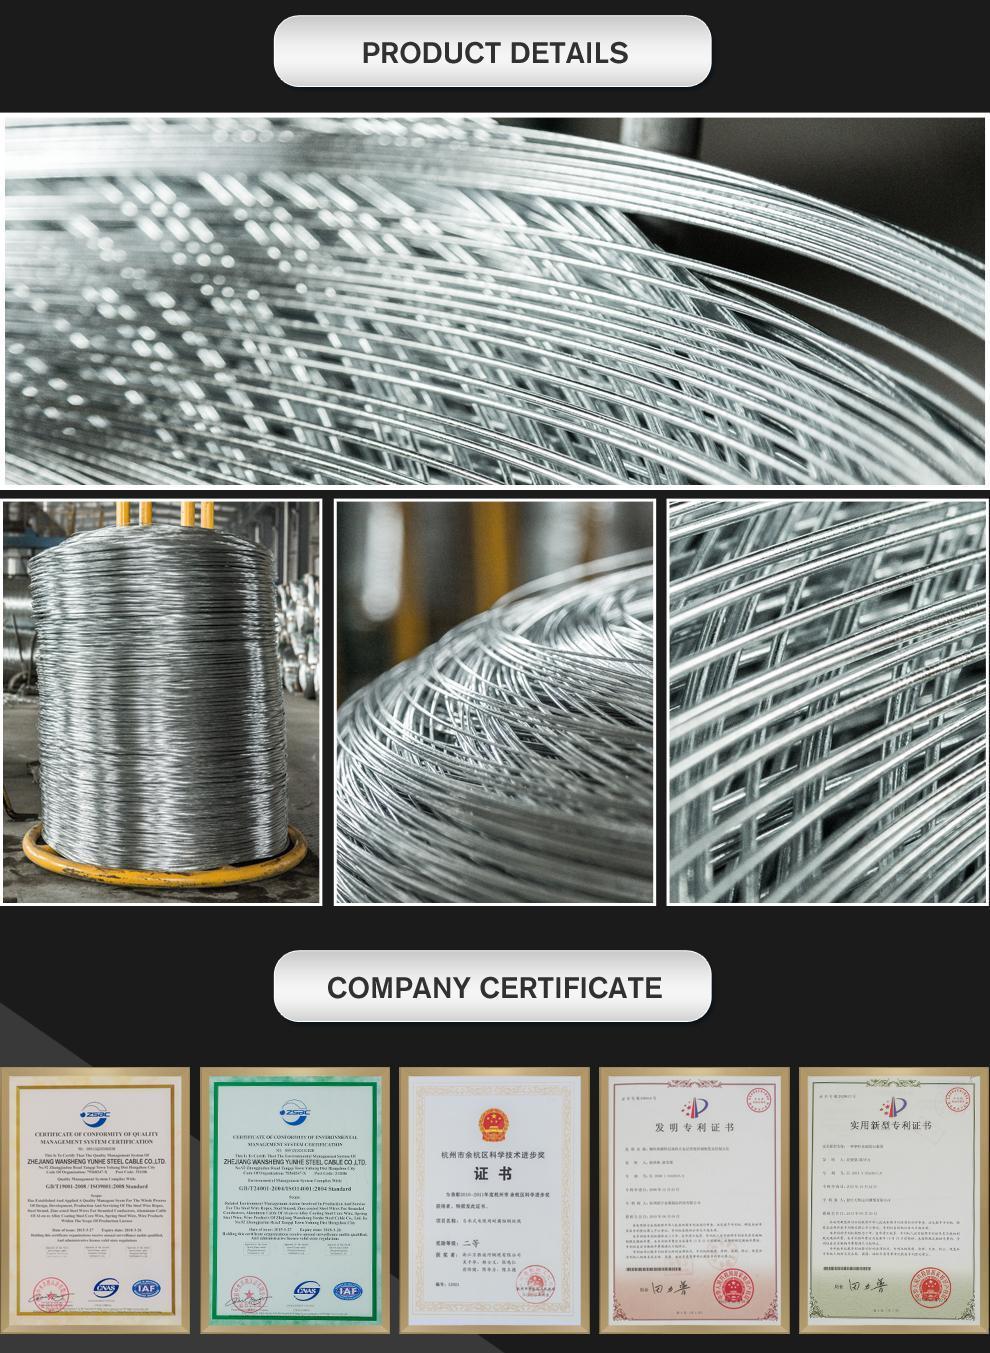 0.4mm 0.8mm 0.9mm 1.0mm 1.2mm Reinforced Steel Wire for Self-Supporting 2 Core Single Mode FTTH Fiber Optic Drop Cable